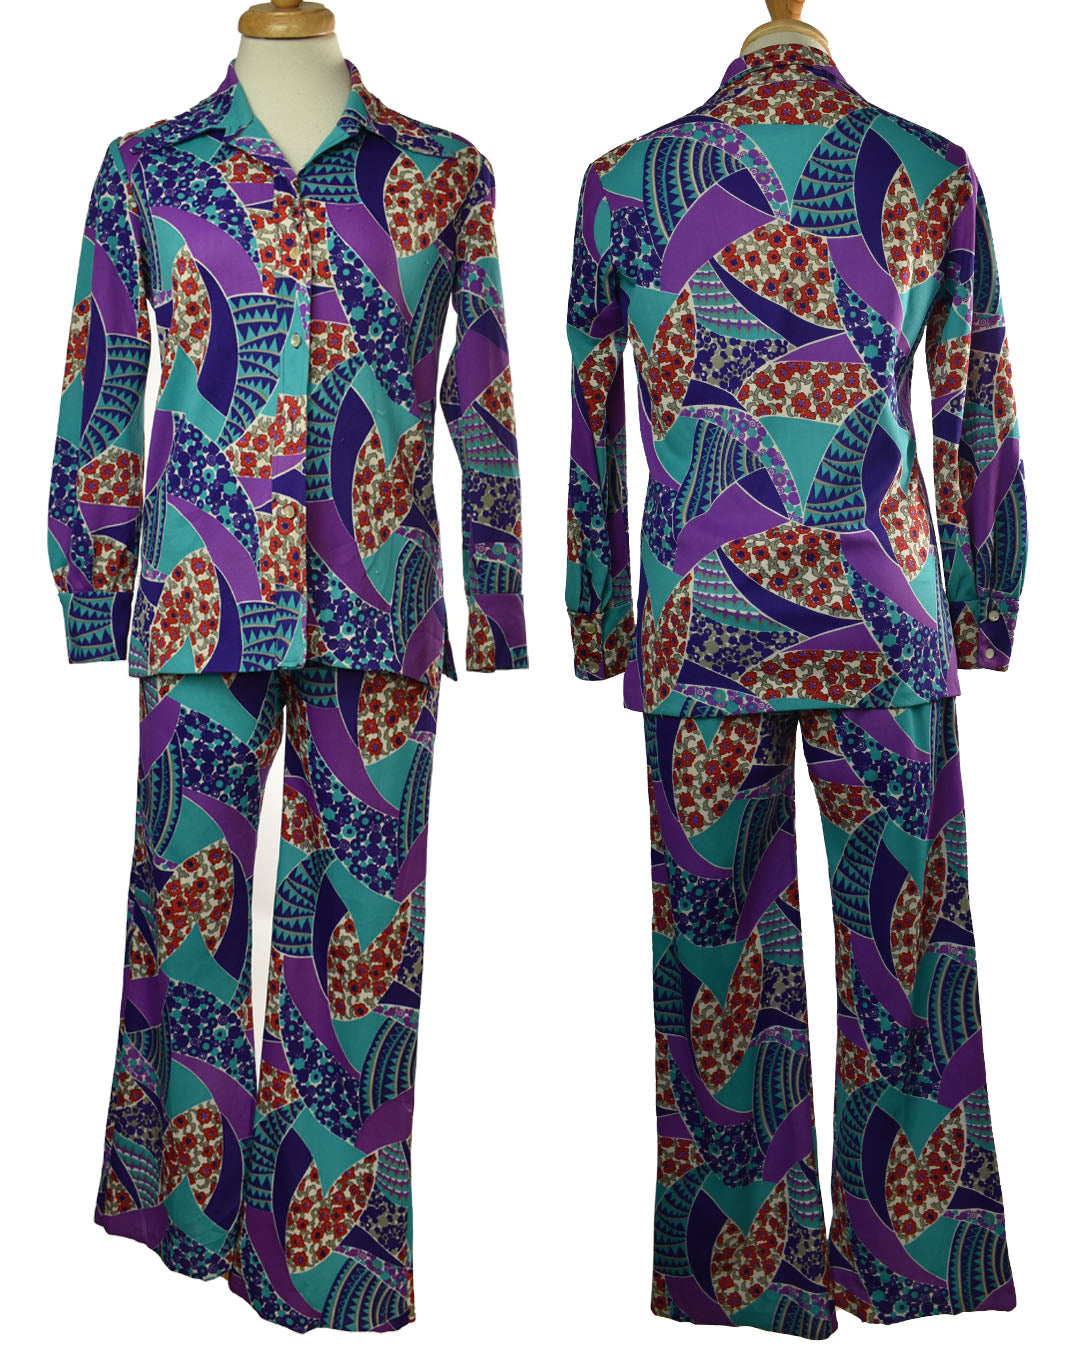 Vintage 70s Psychedelic Pattern 2 Piece Pants and Top / Jacket Set